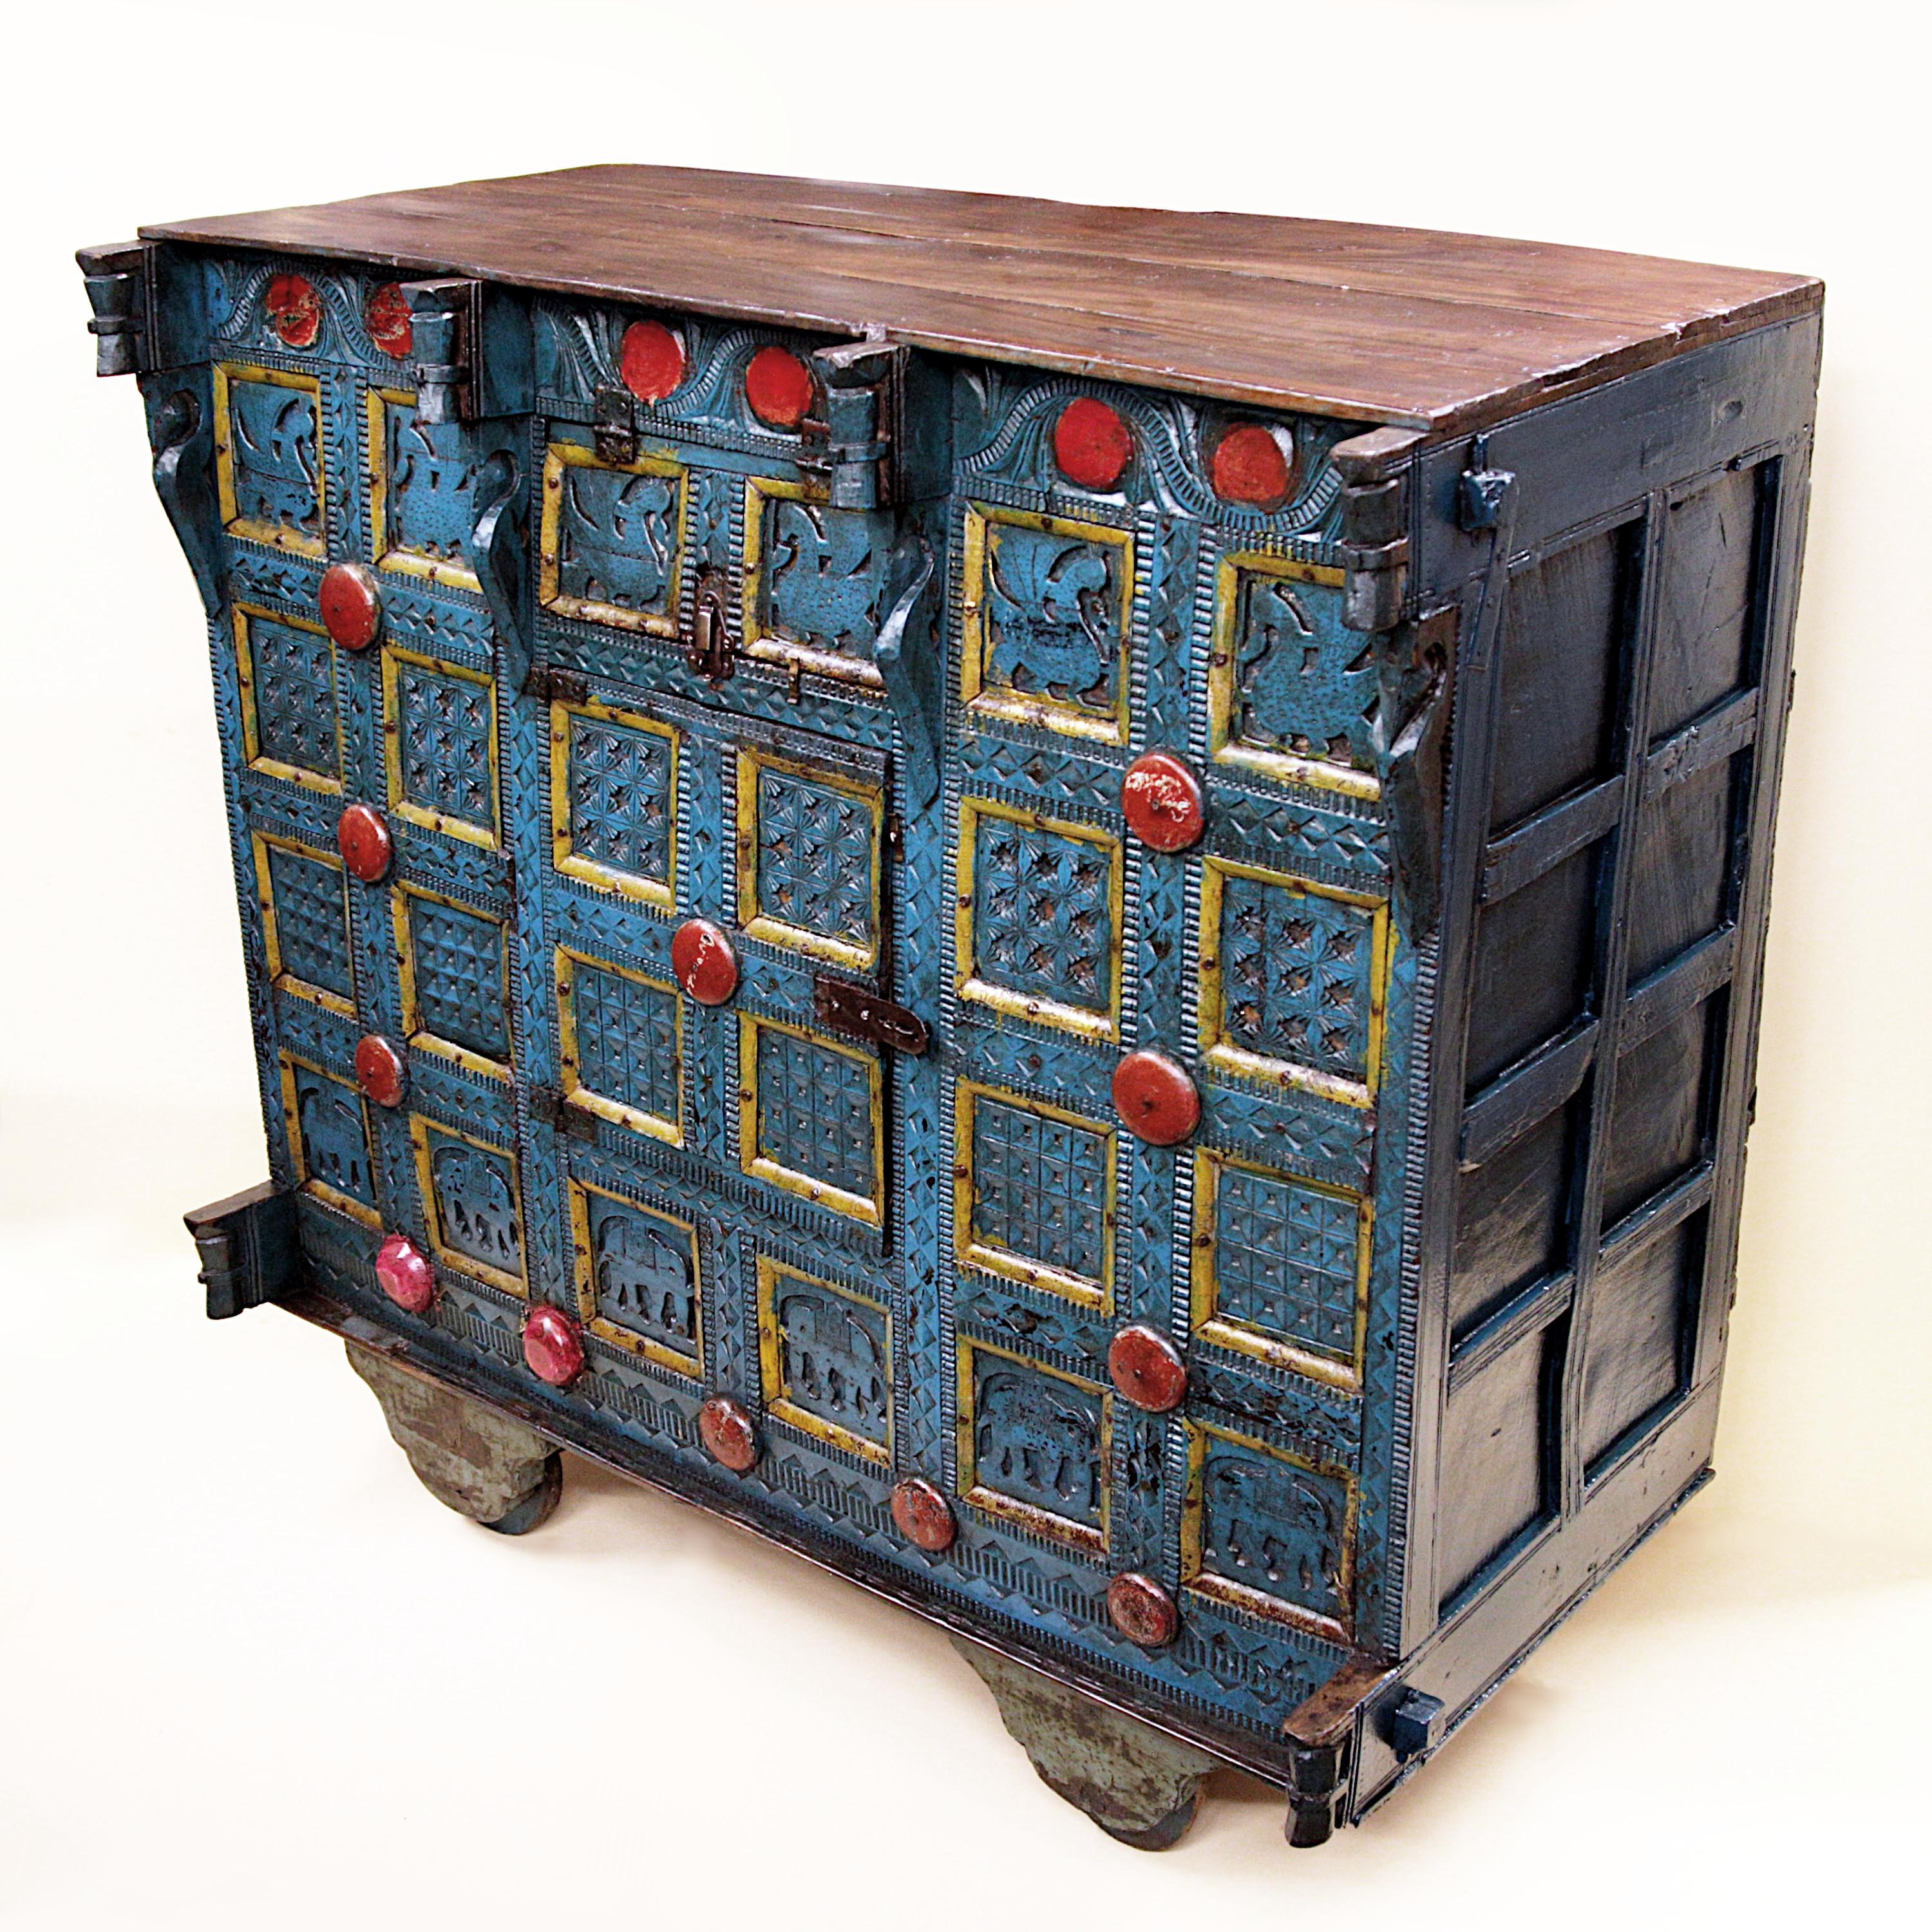 Wonderful early 20th century merchants chest/trunk. Chest features solid wood construction, ornately carved decoration, iron hardware, and wheels. Cabinet has been fully painted in bright, primary colors that beautifully accents the carving. With